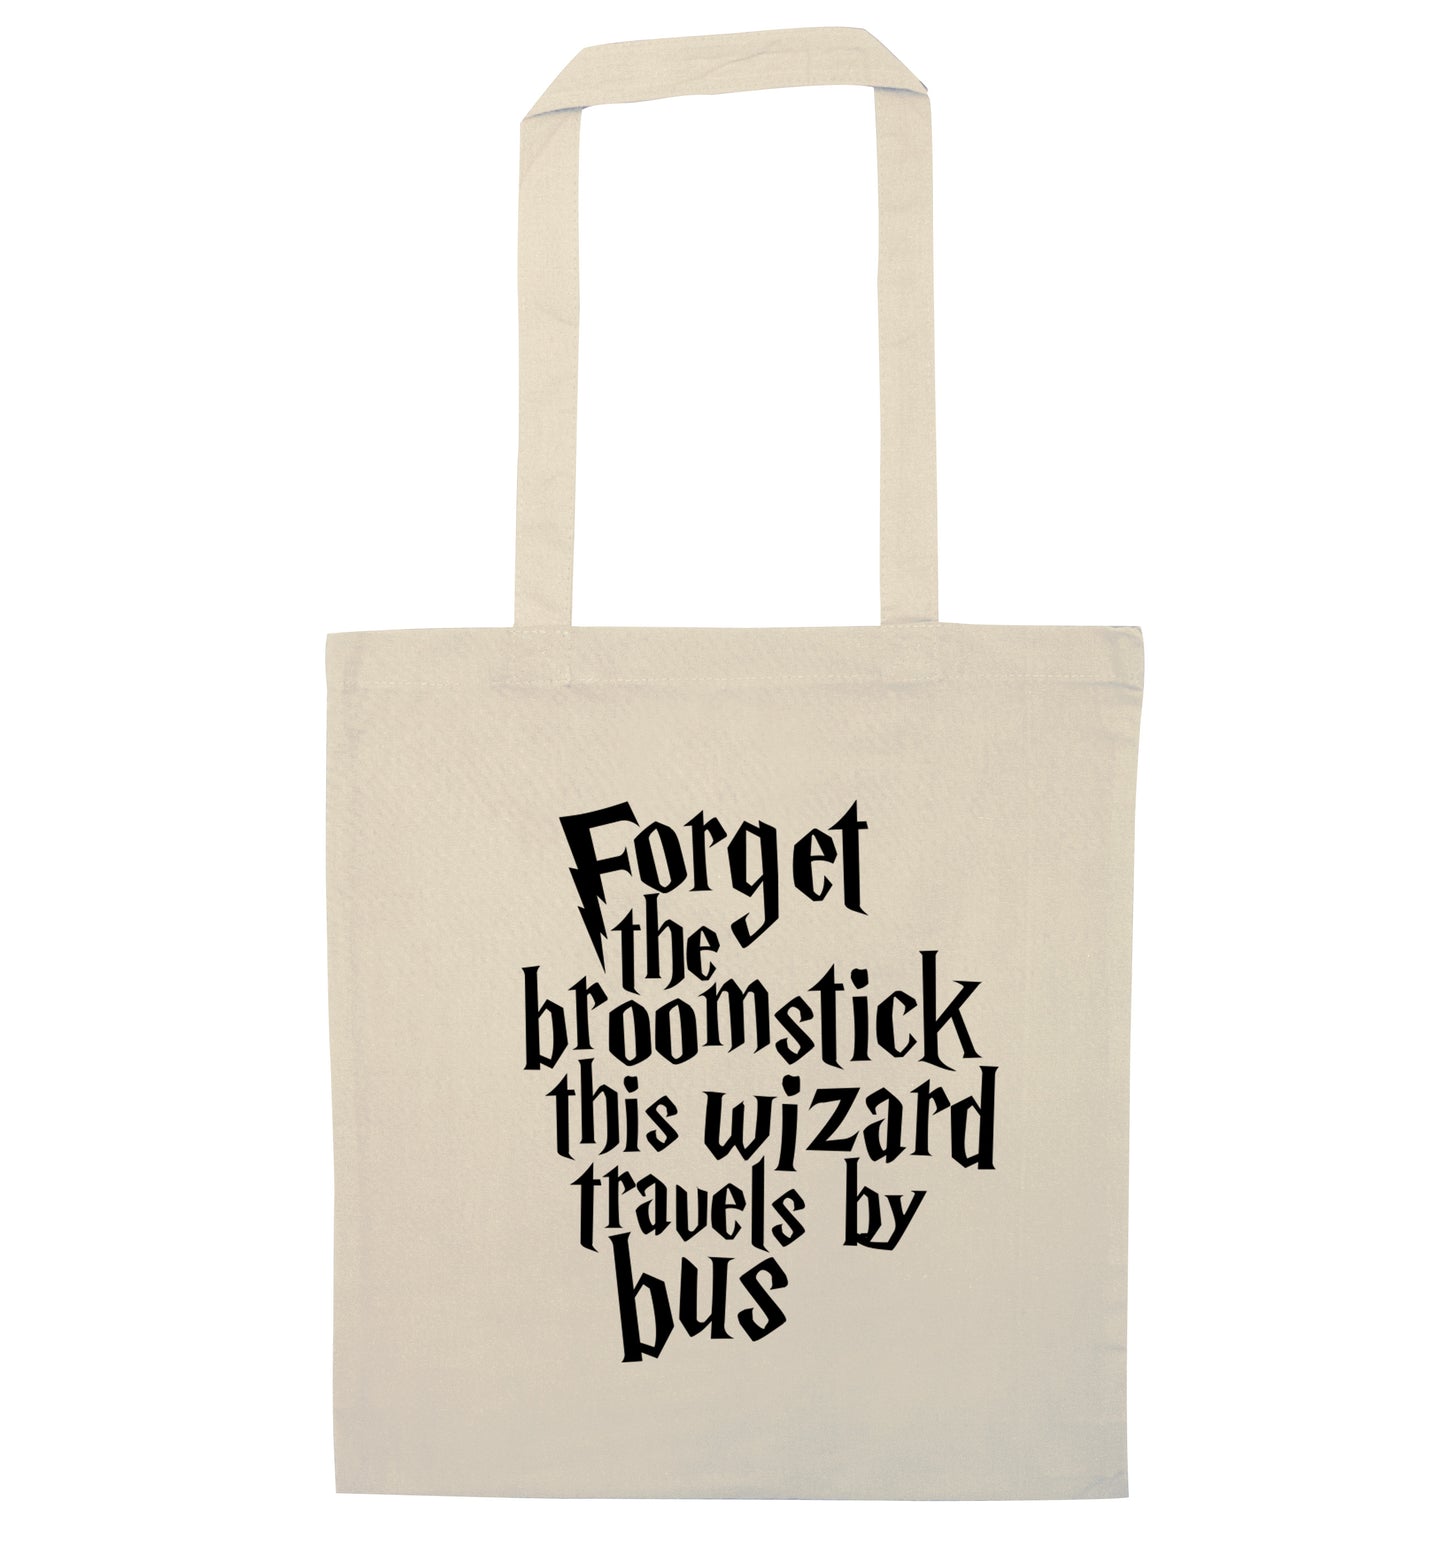 Forget the broomstick this wizard travels by bus natural tote bag